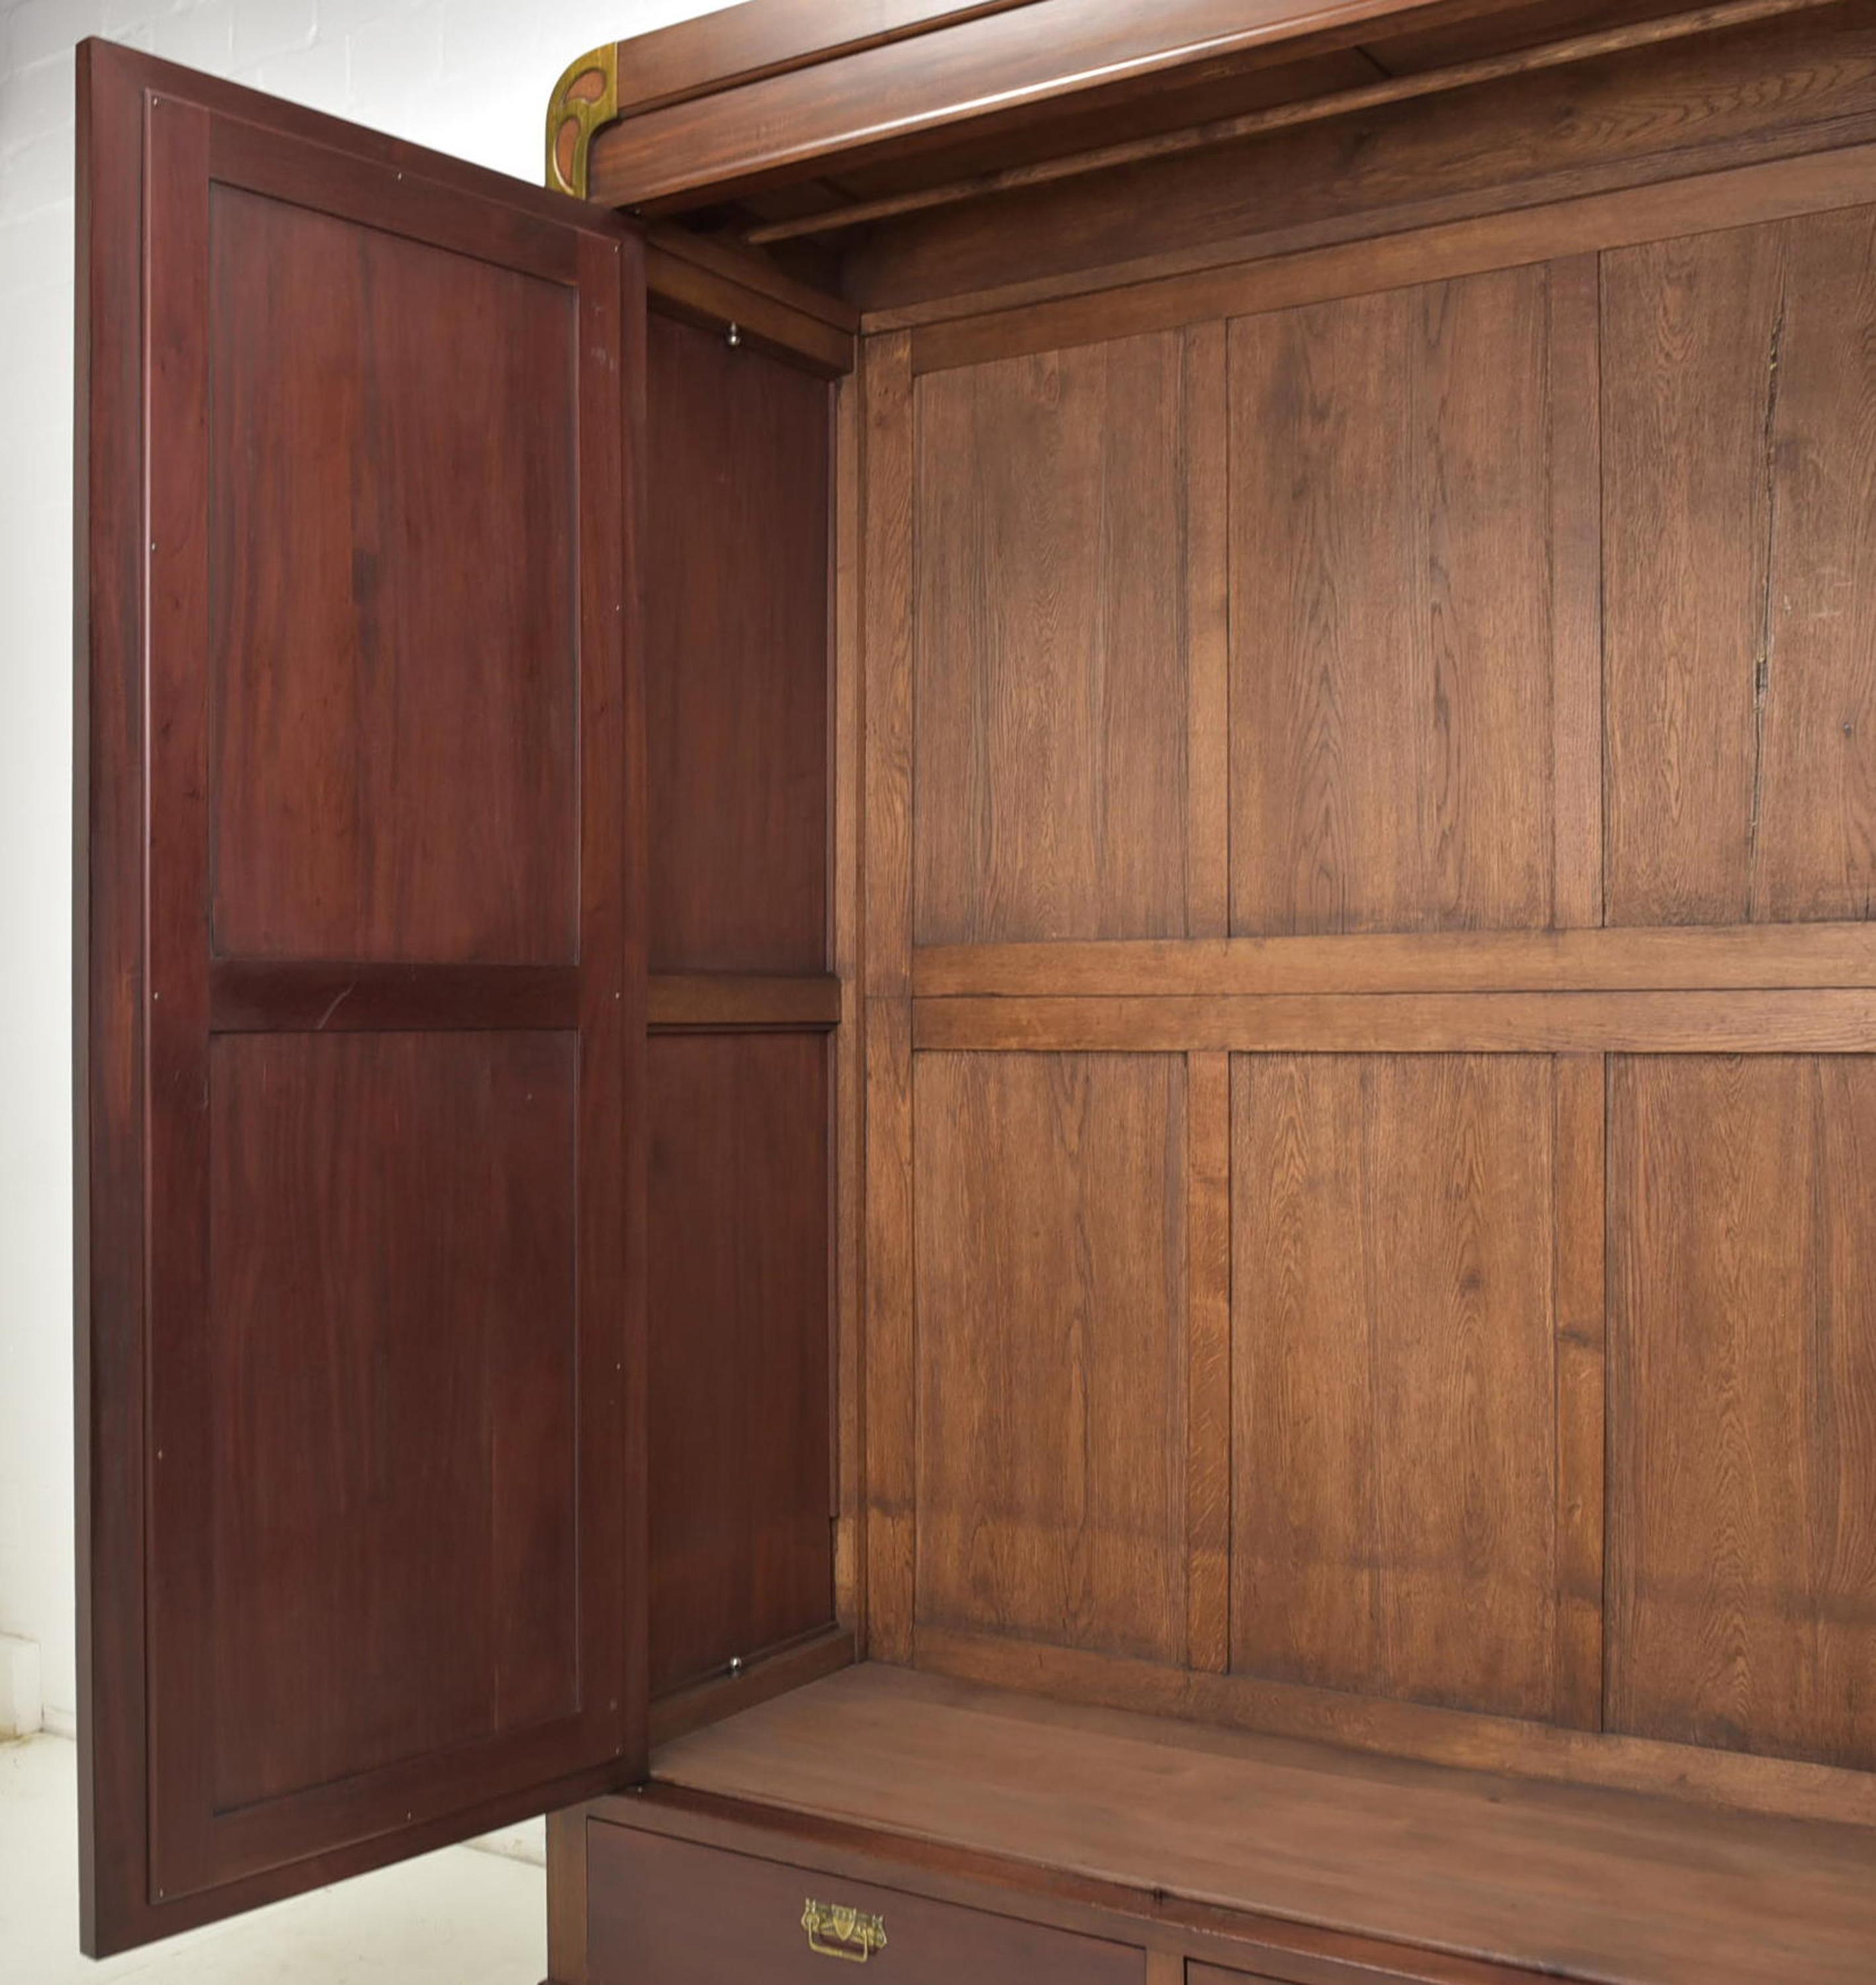 20th Century Art Nouveau Hallway Cabinet in Mahogany, 1920 For Sale